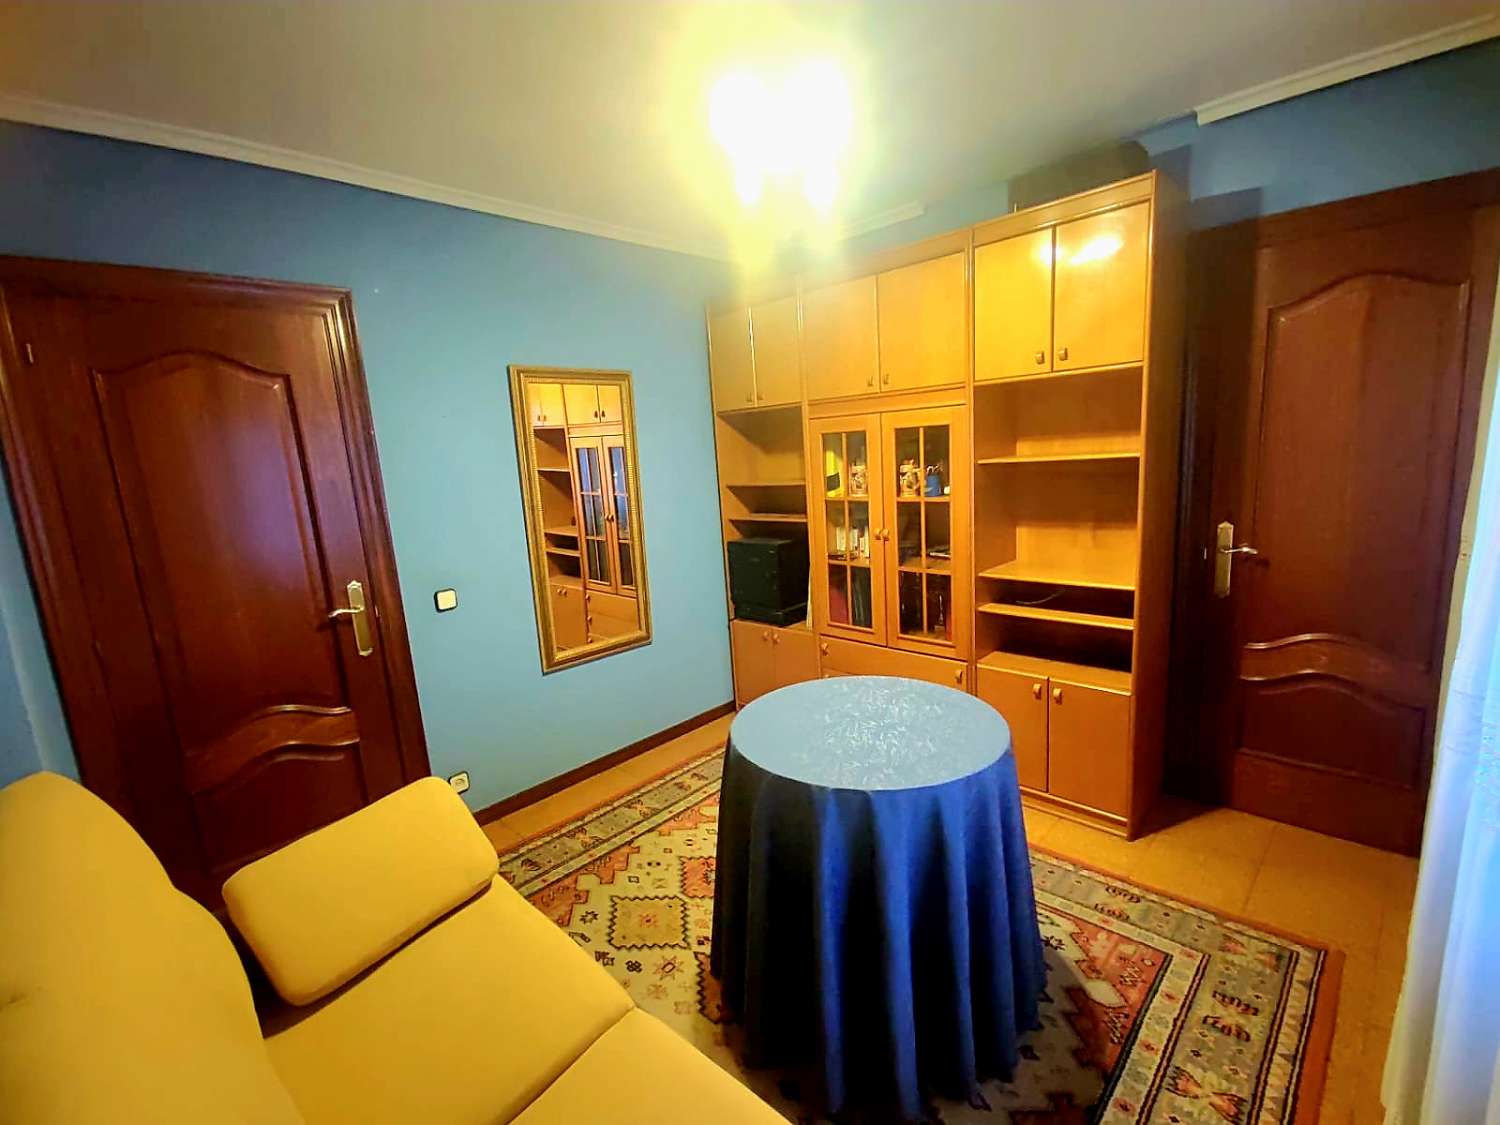 3-BEDROOM APARTMENT WITH GARAGE AND STORAGE ROOM IN STO DOMINGO AREA